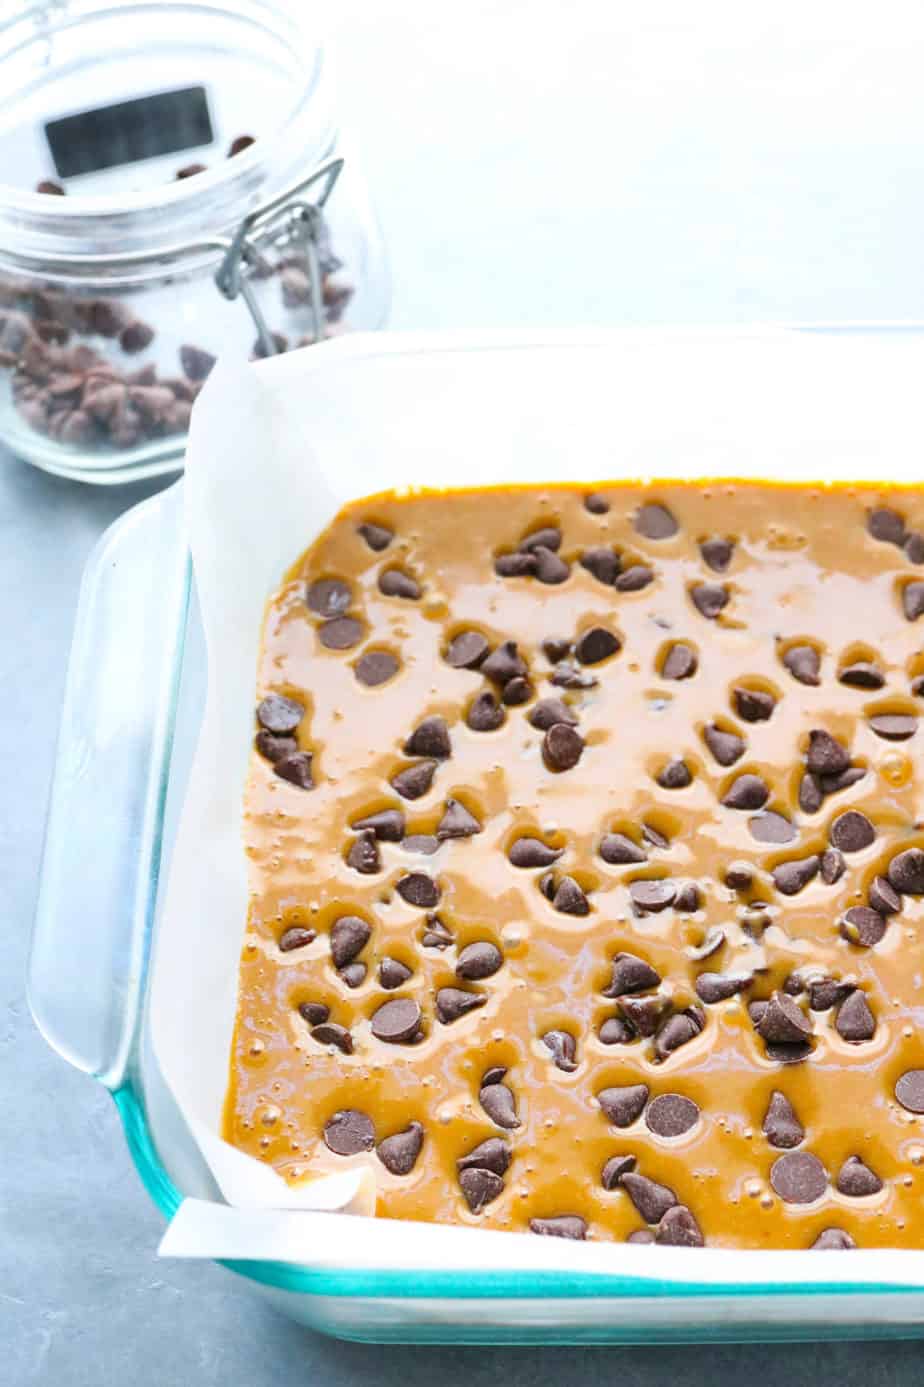 Chocolate chip blondie batter spread in a baking dish with chocolate chips